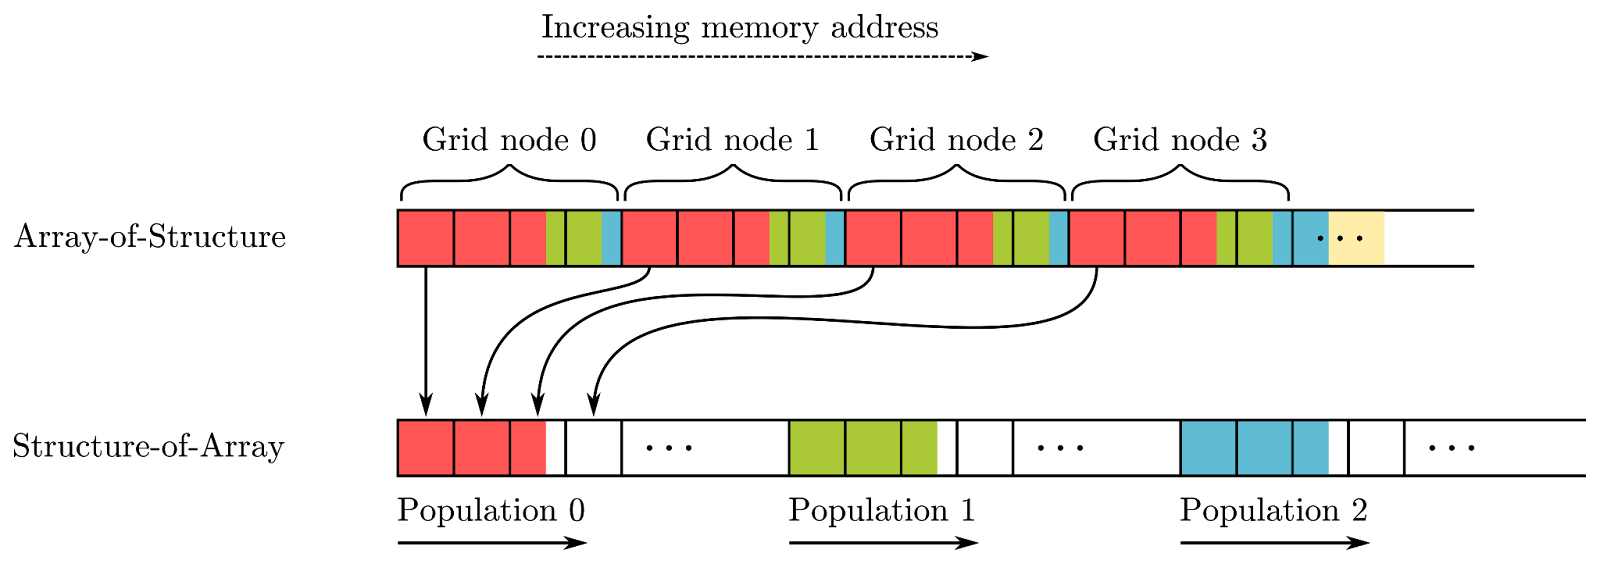 Two memory layouts are shown: Array-of-Structure and Structure-of-Array. In Array-of-Structure, the populations of each node are stored linearly in memory, i.e., the populations of node i-1 precede the populations of node i. Structure-of-Arrays stores the first population of all cells, then the second population of all cells, and so on.